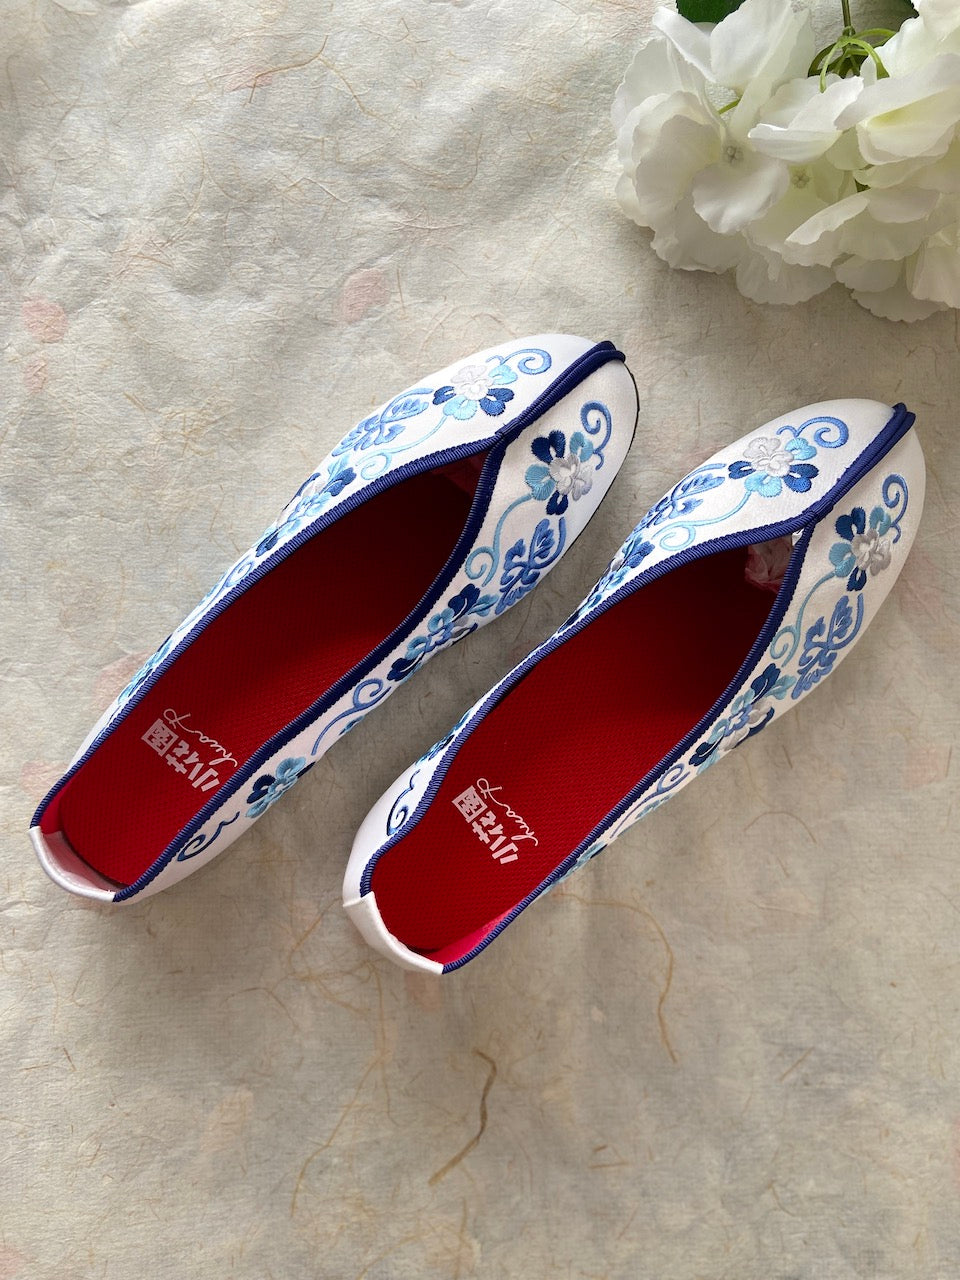 Floral Embroidered Shoes - Blue